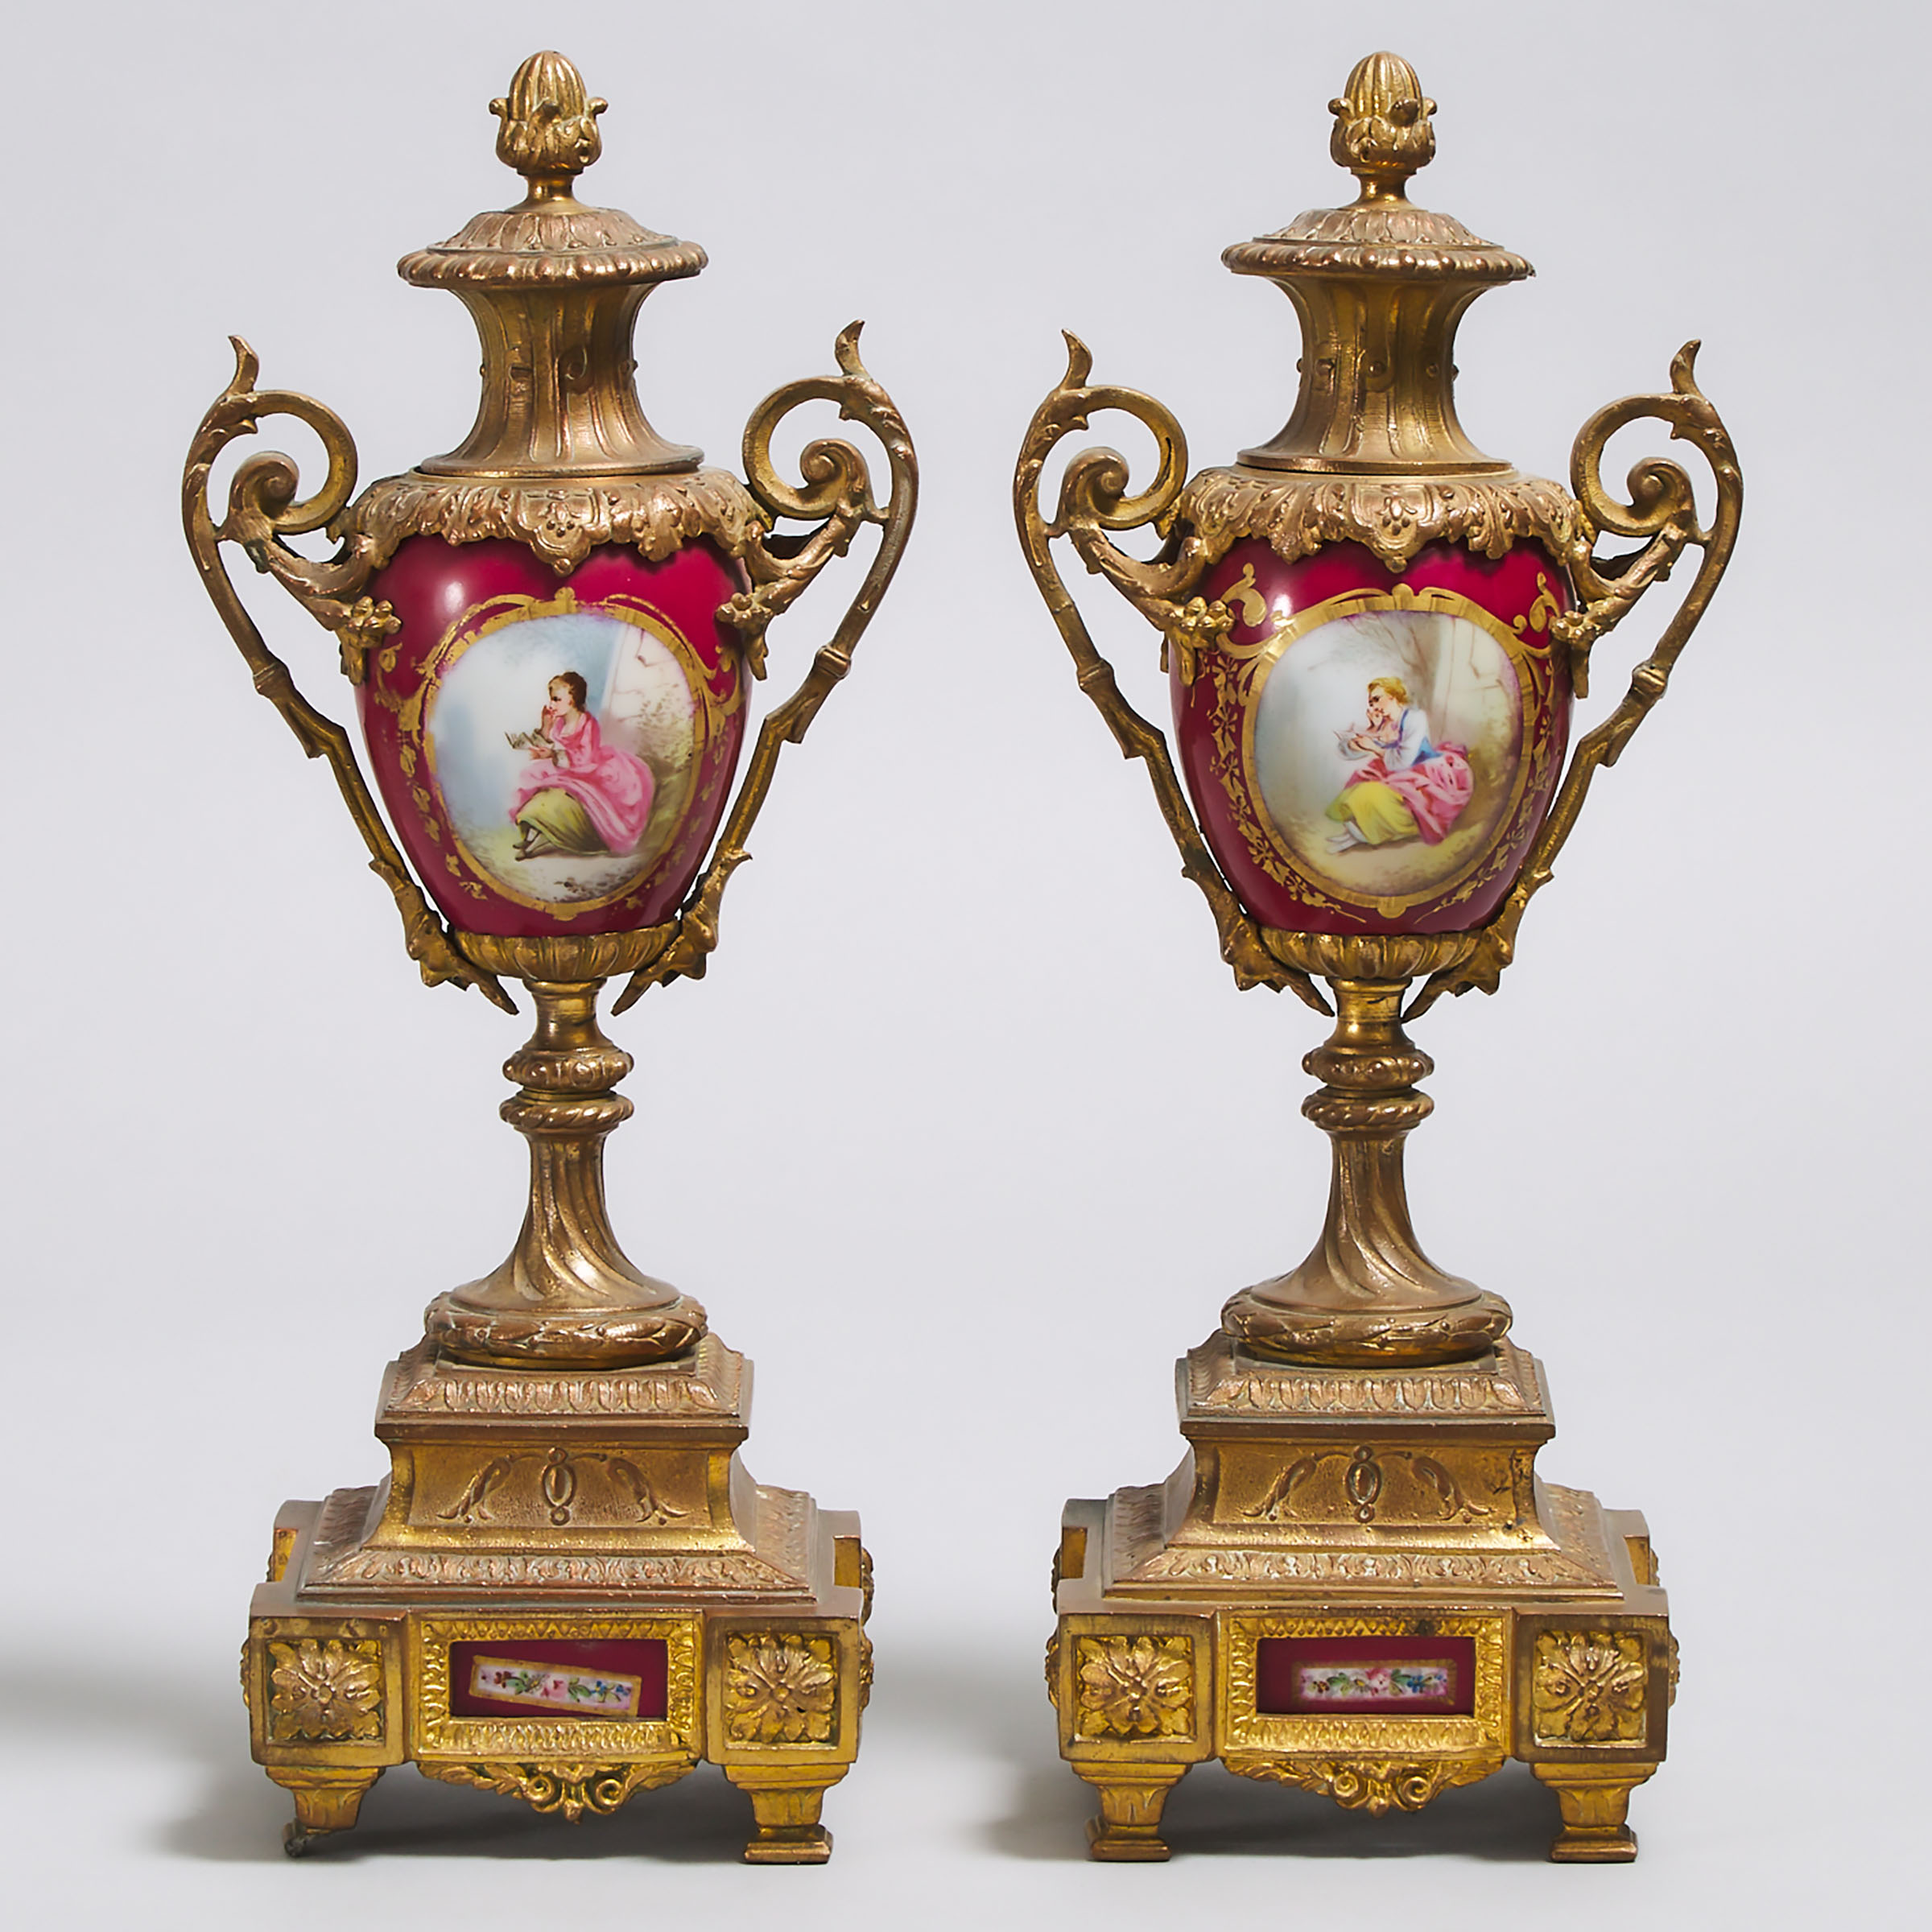 Pair of French ´Sèvres Style Porcelain Mounted Gilt Metal Vase Form Mantel Garniture, late 19th century